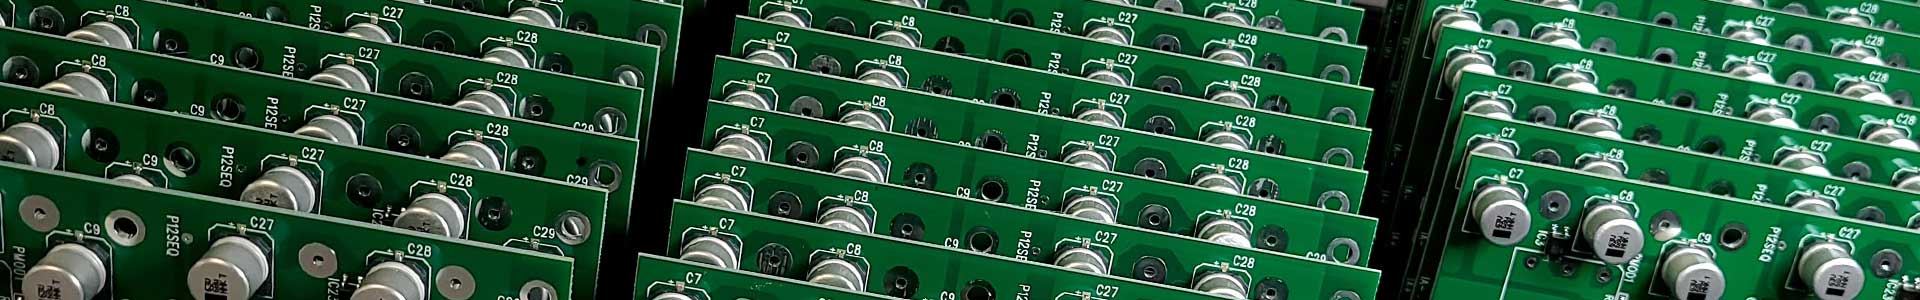 Rows of Circuit Boards